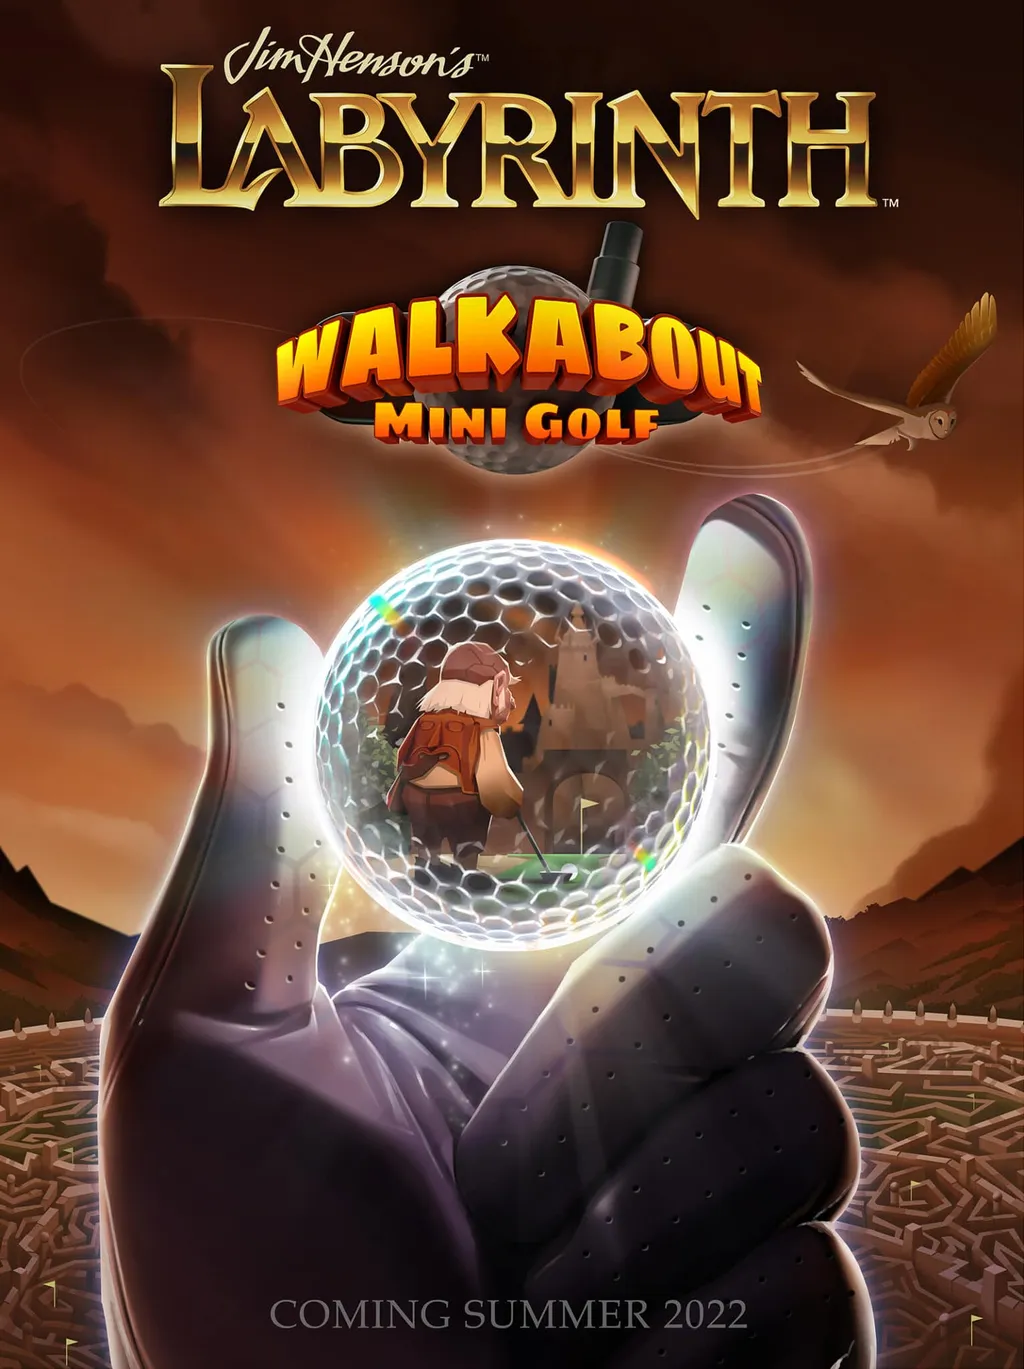 Walkabout Mini Golf Will Add New Paid Course Inspired By 1986 Film Labyrinth